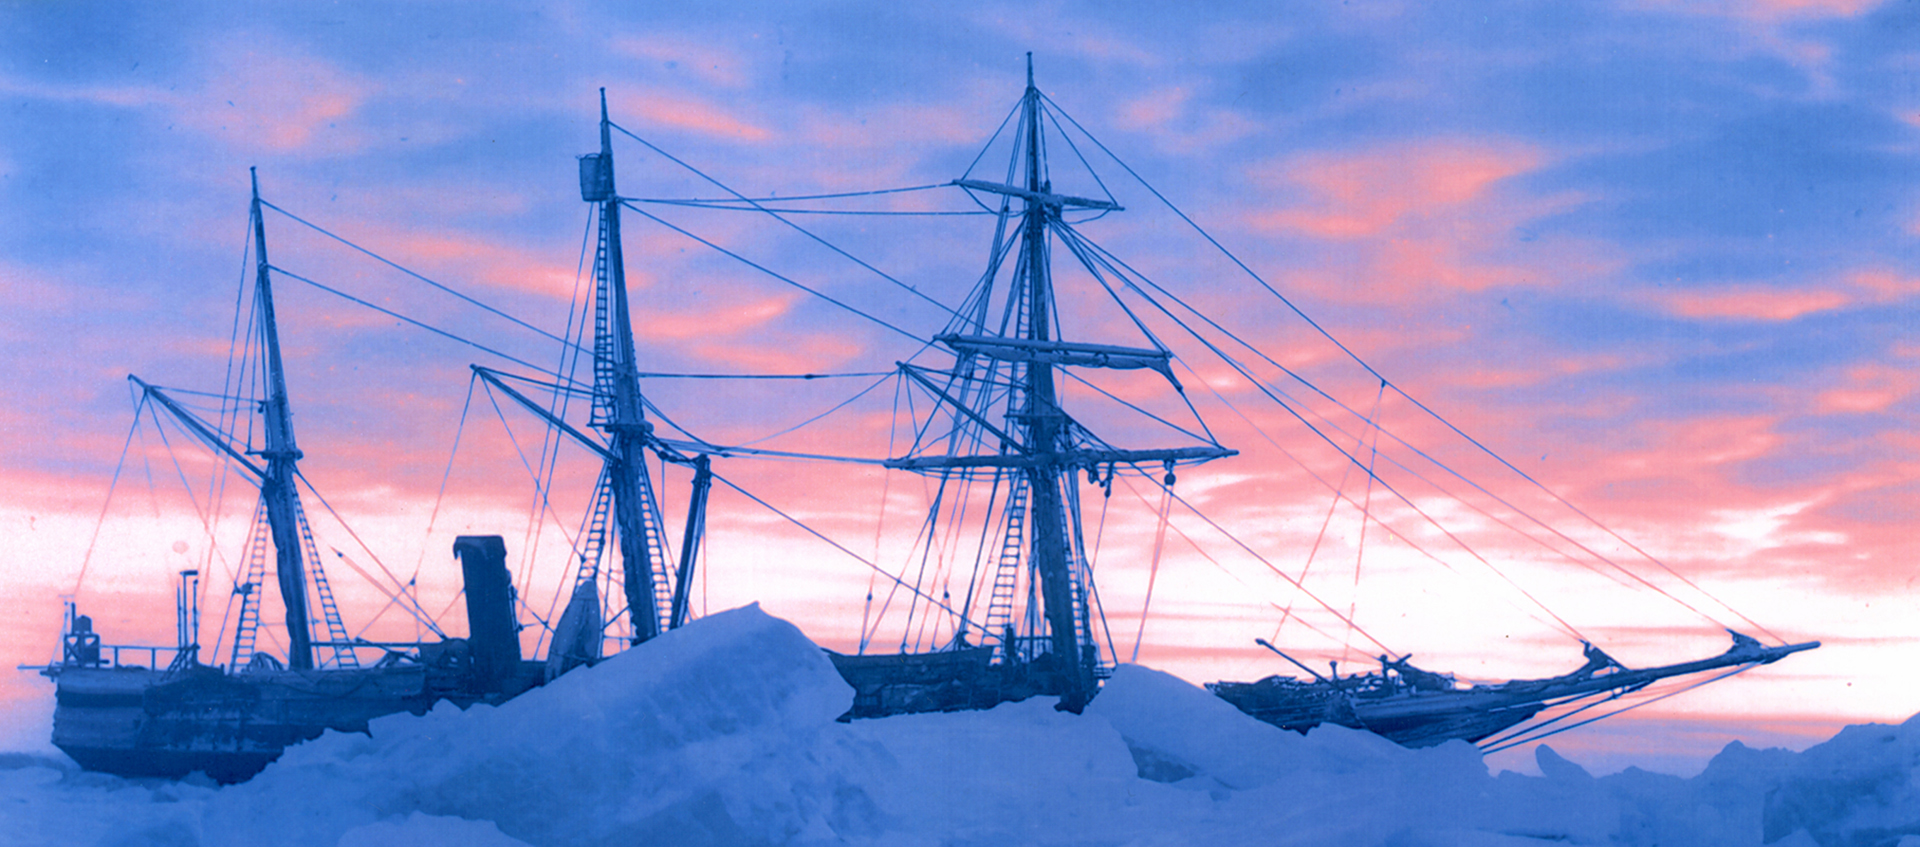 Side view of a sailing vessel, partially obscured by pack ice, against a blue and pink sky.